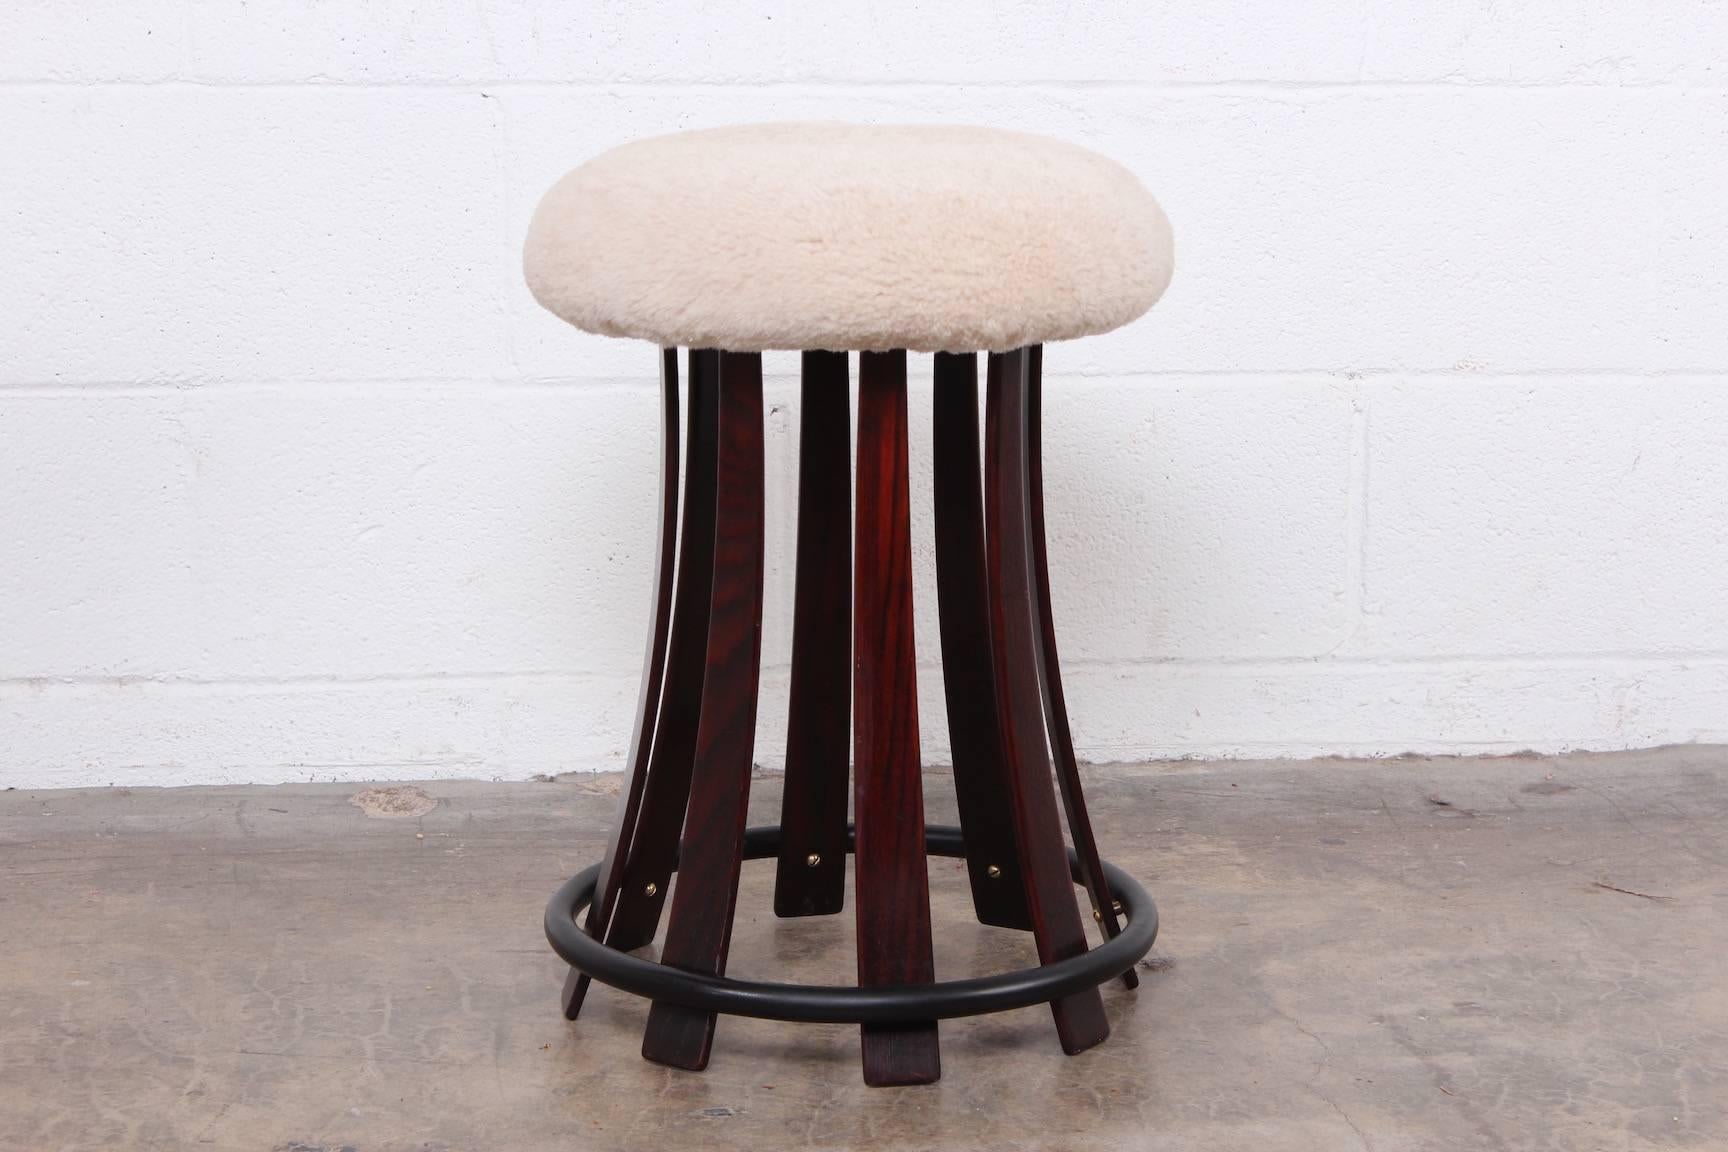 An ash stool with sheepskin cover seat. Designed by Edward Wormley for Dunbar.